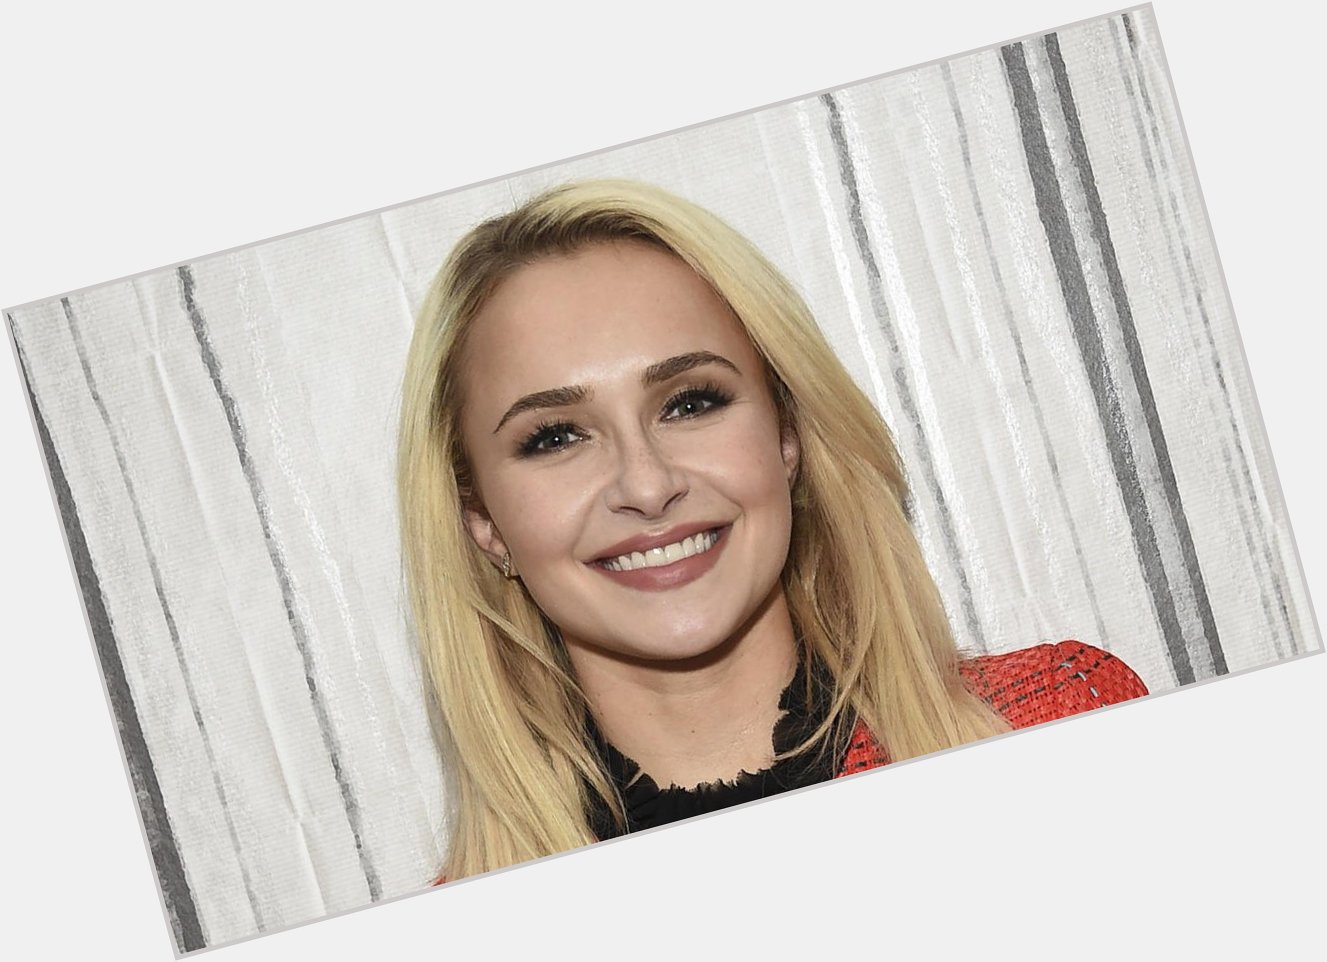 August 21, 2020
Happy birthday to actress Hayden Panettiere 31 years old. 